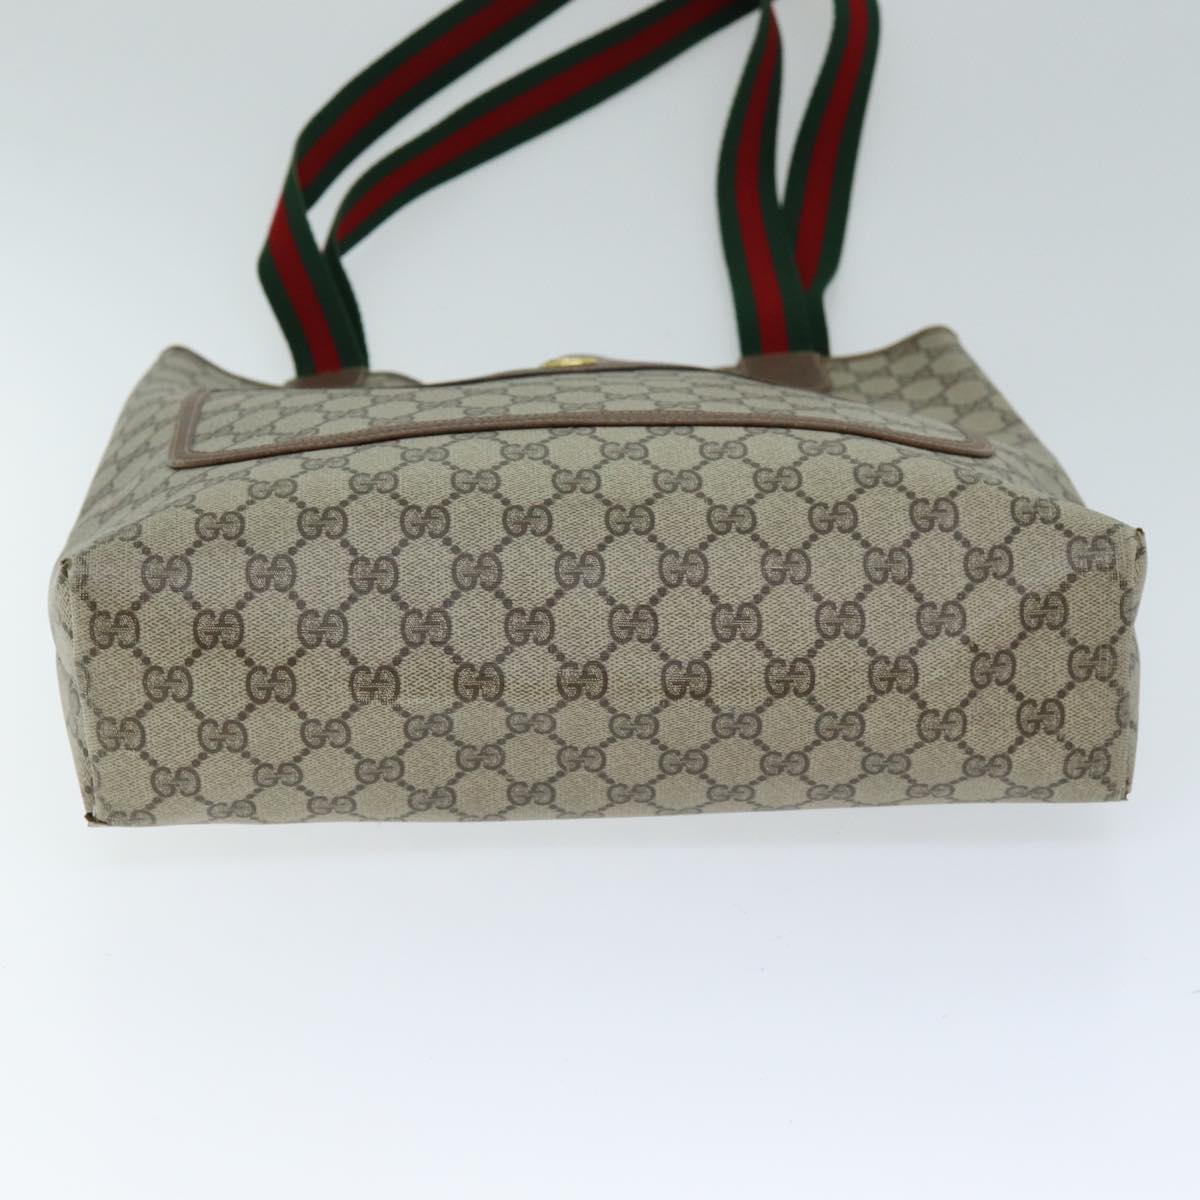 GUCCI GG Supreme Web Sherry Line Tote Bag PVC Beige Red 40 02 003 Auth yk12437